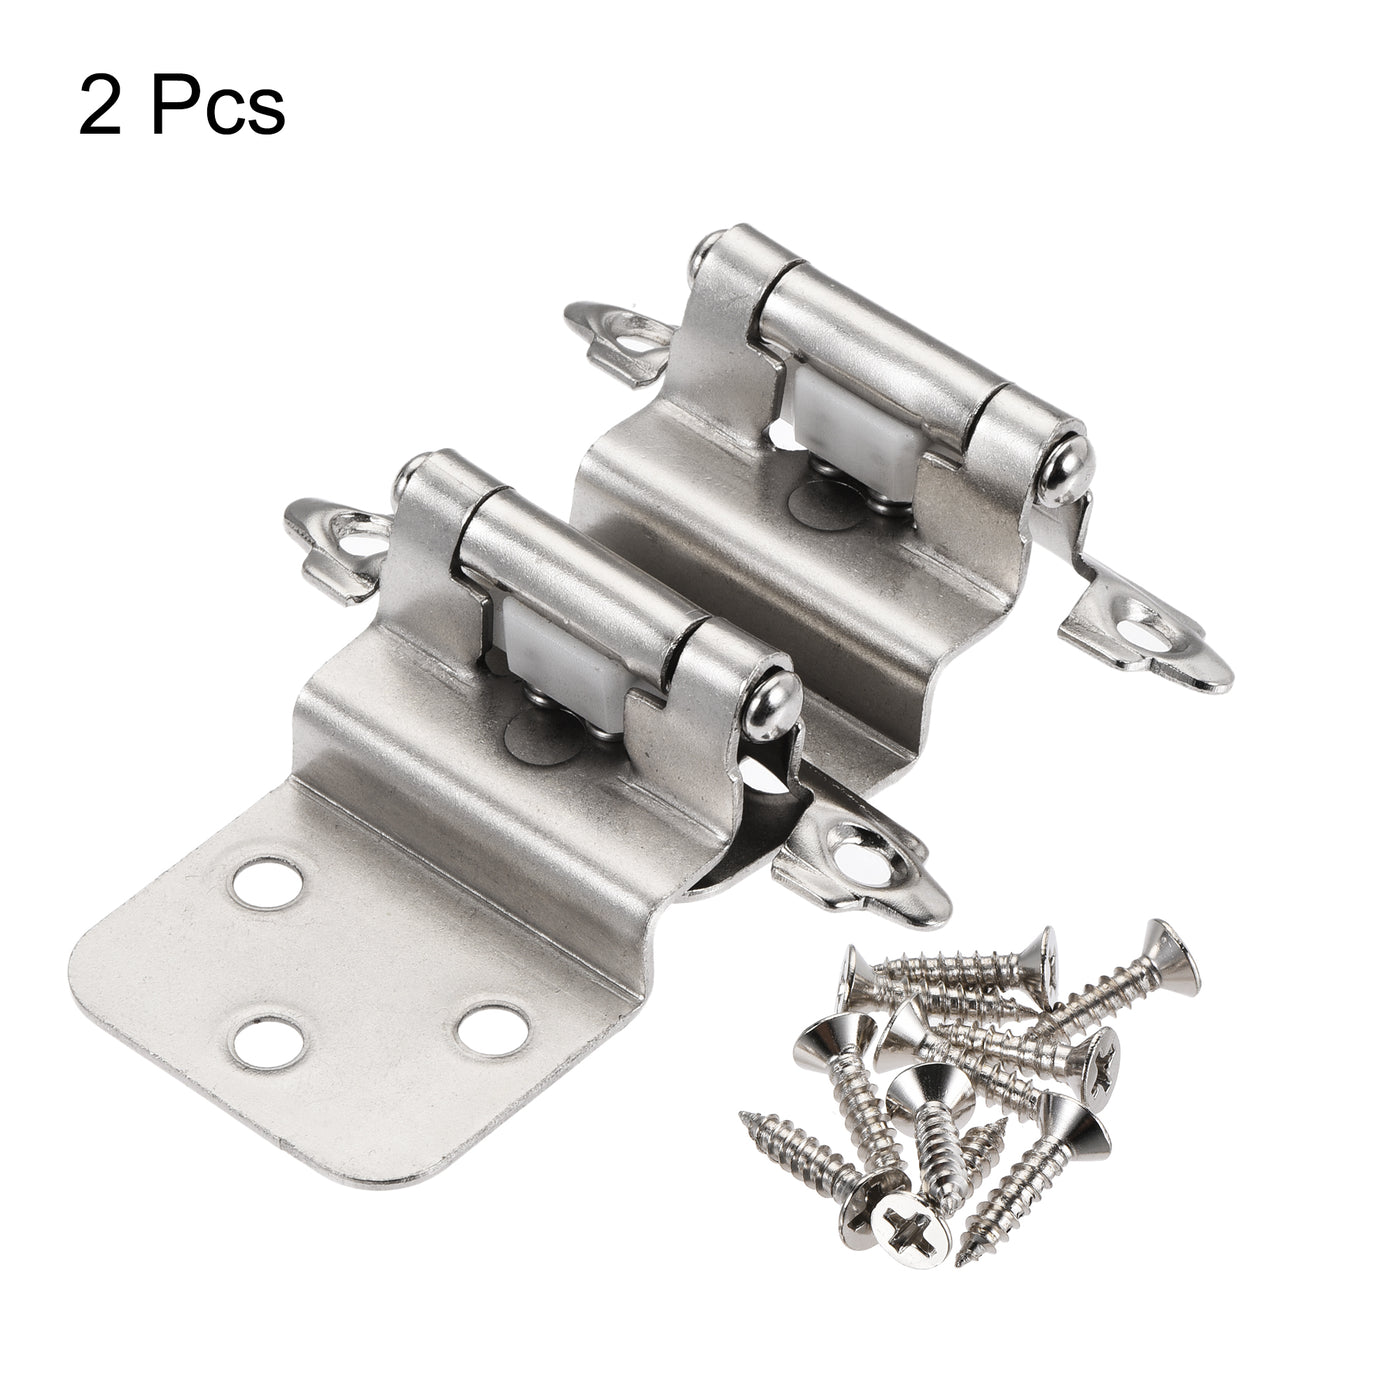 uxcell Uxcell 3/8 Inch Inset Cabinet Hinges Self Closing 2.76 Inch for Cupboard Closet Door with Screws Silver Tone 2Pcs